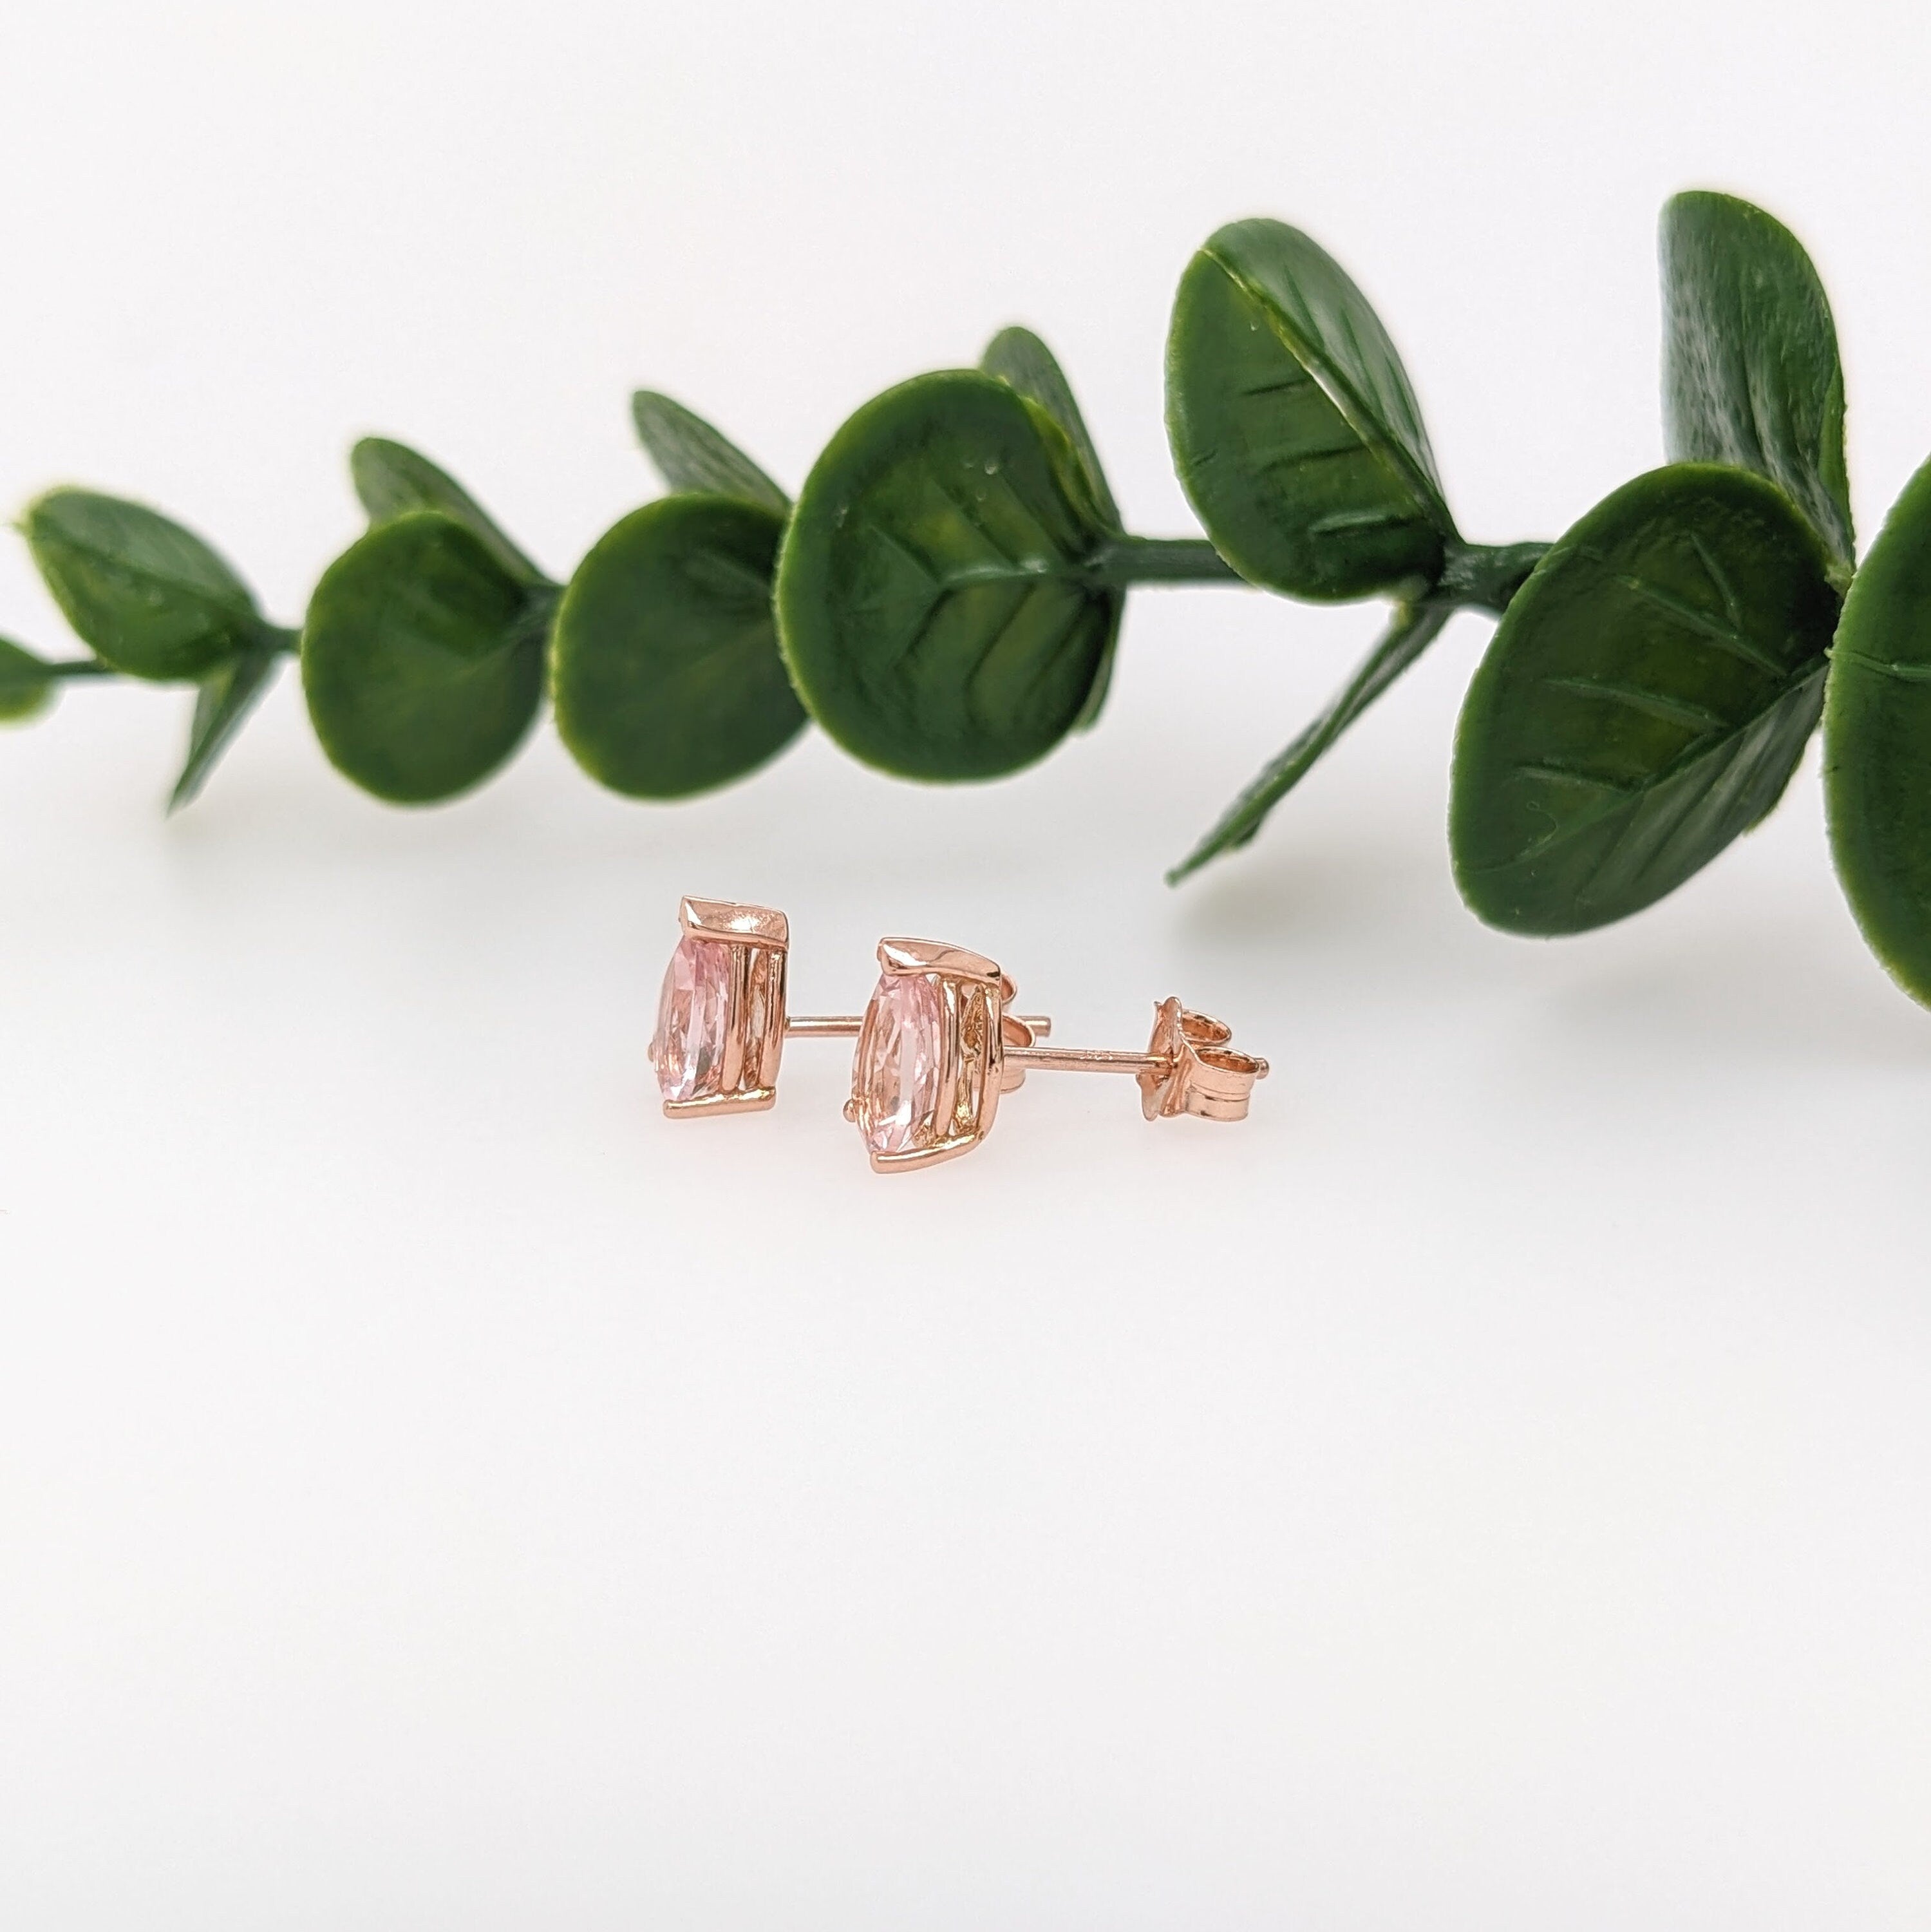 Classic Morganite Studs in Solid 14K Rose Gold | Pear Shape 7x5mm | Solitaire Findings | Gemstone Earrings | Simple Studs | Minimalist